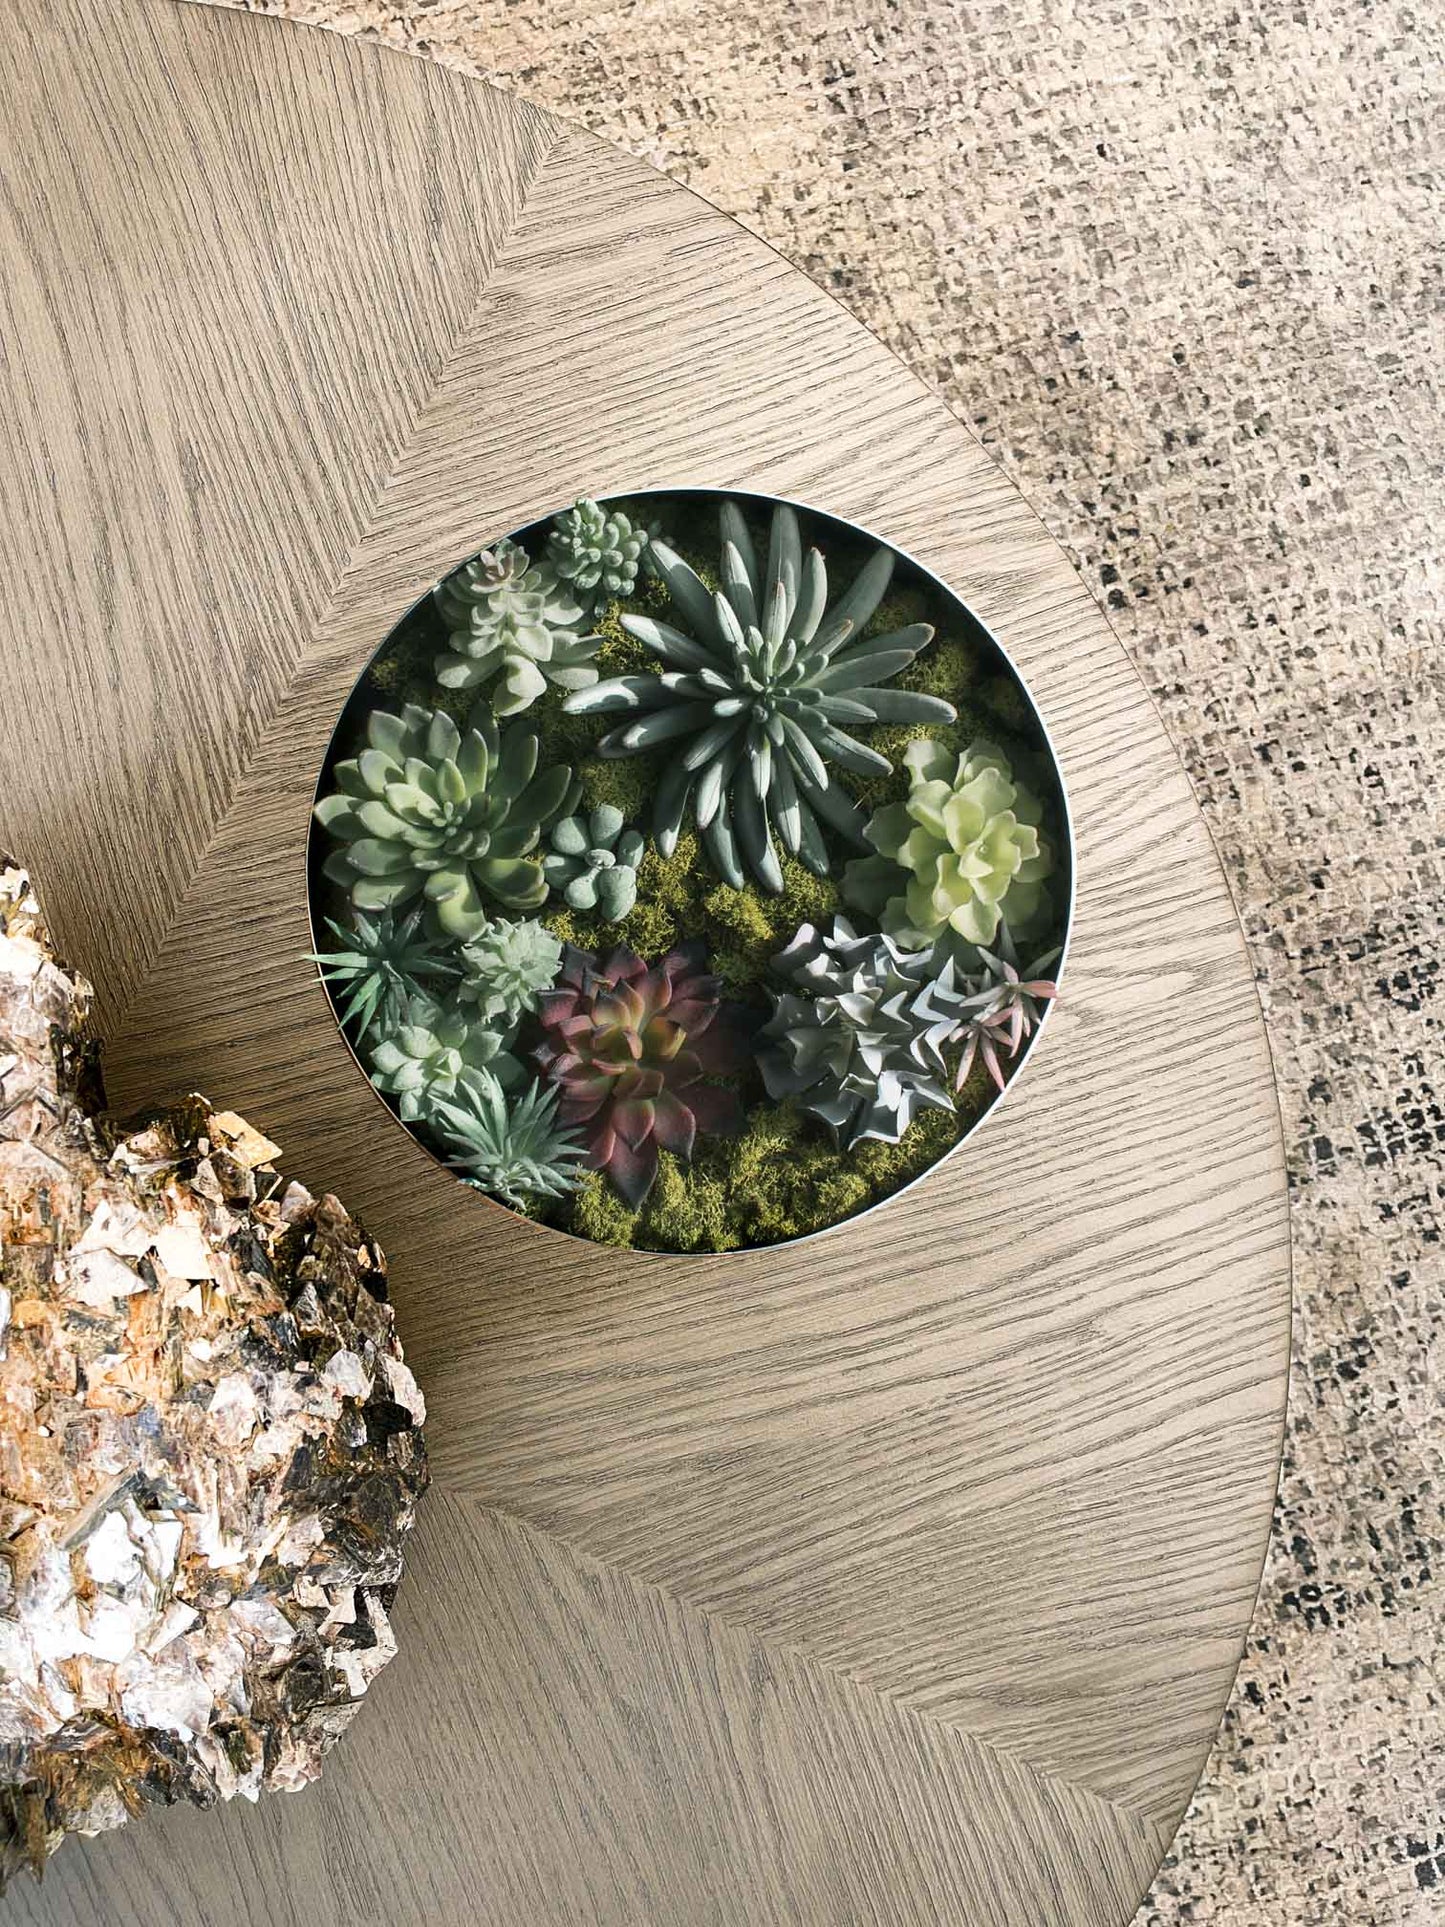 Large painted white decorative bowl with antique brass finish interior filled with succulents on table with geode object.